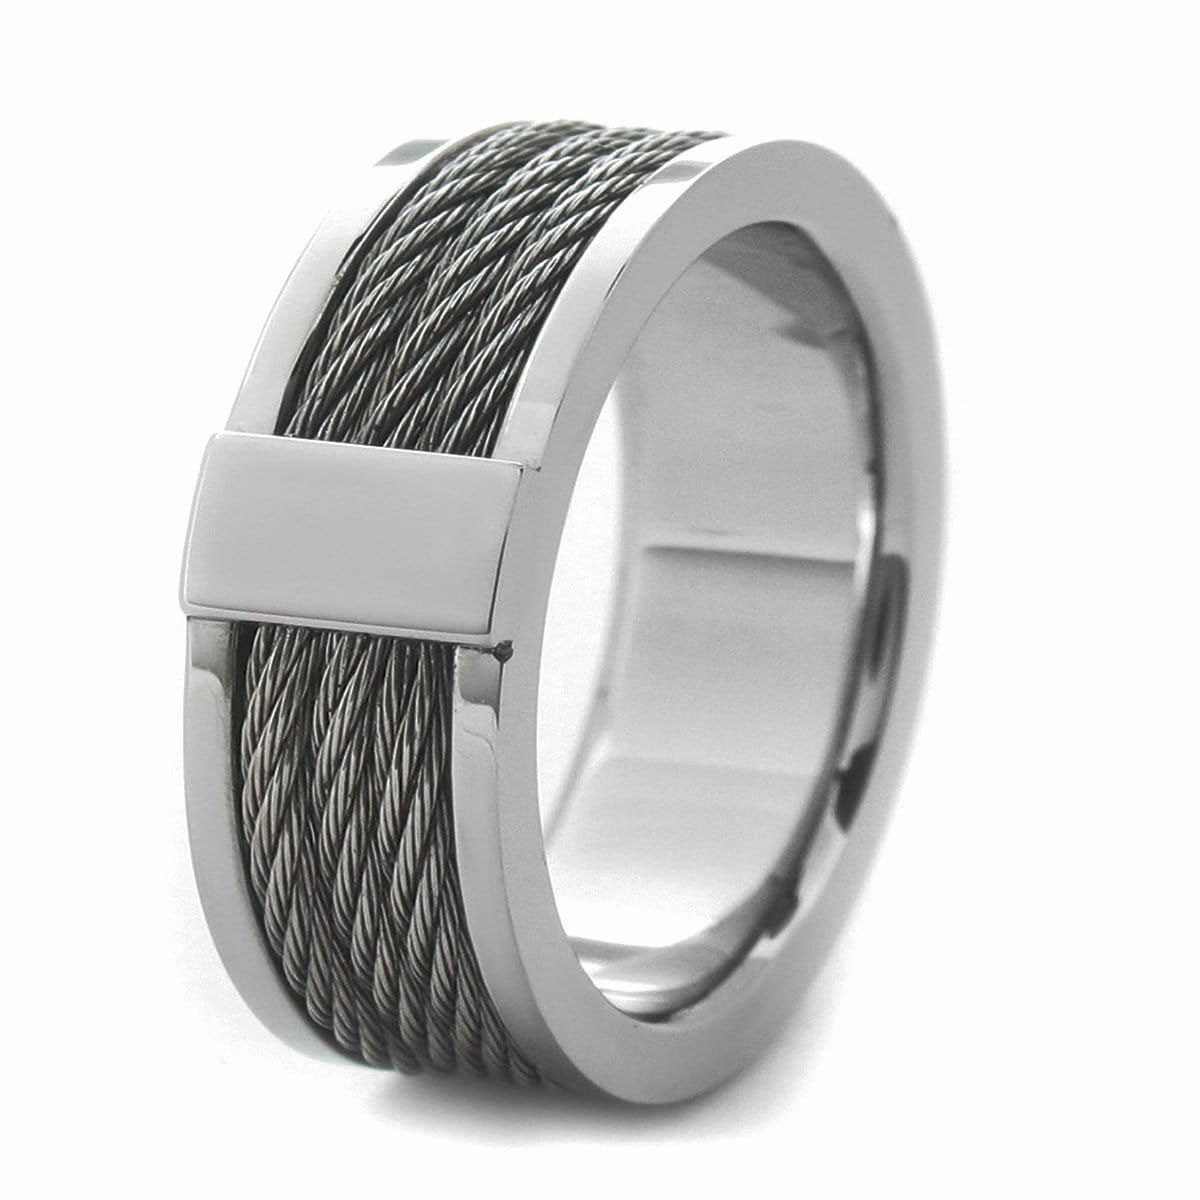 INOX JEWELRY Rings Silver Tone Stainless Steel Ring with Three Inlaid Cables